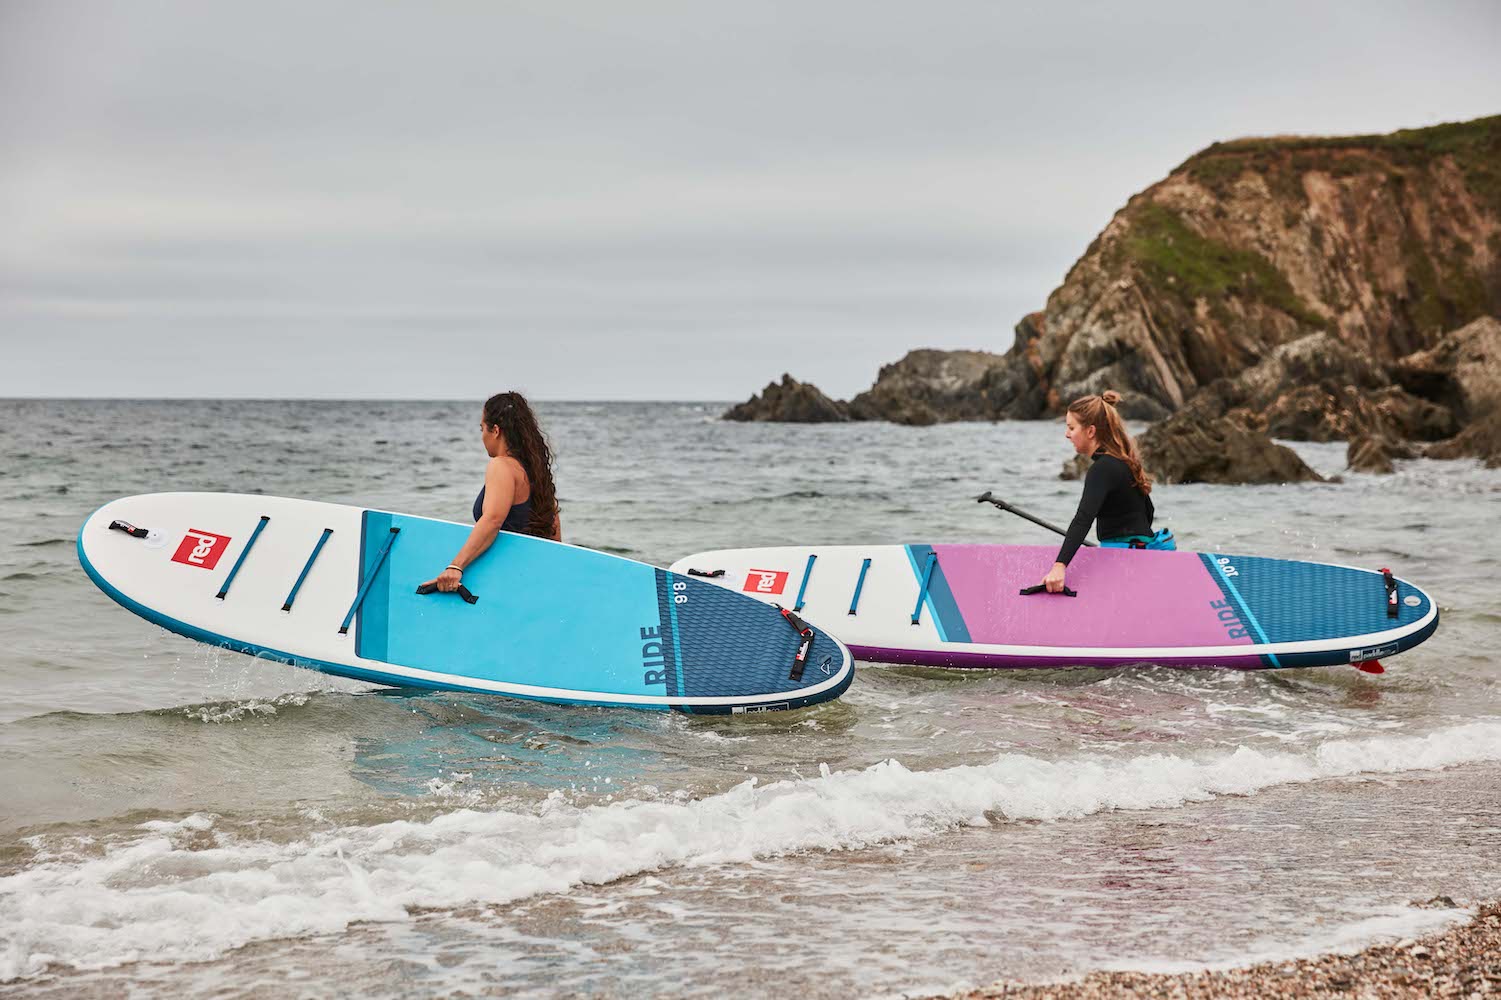 two women carrying paddle boards wading into the sea